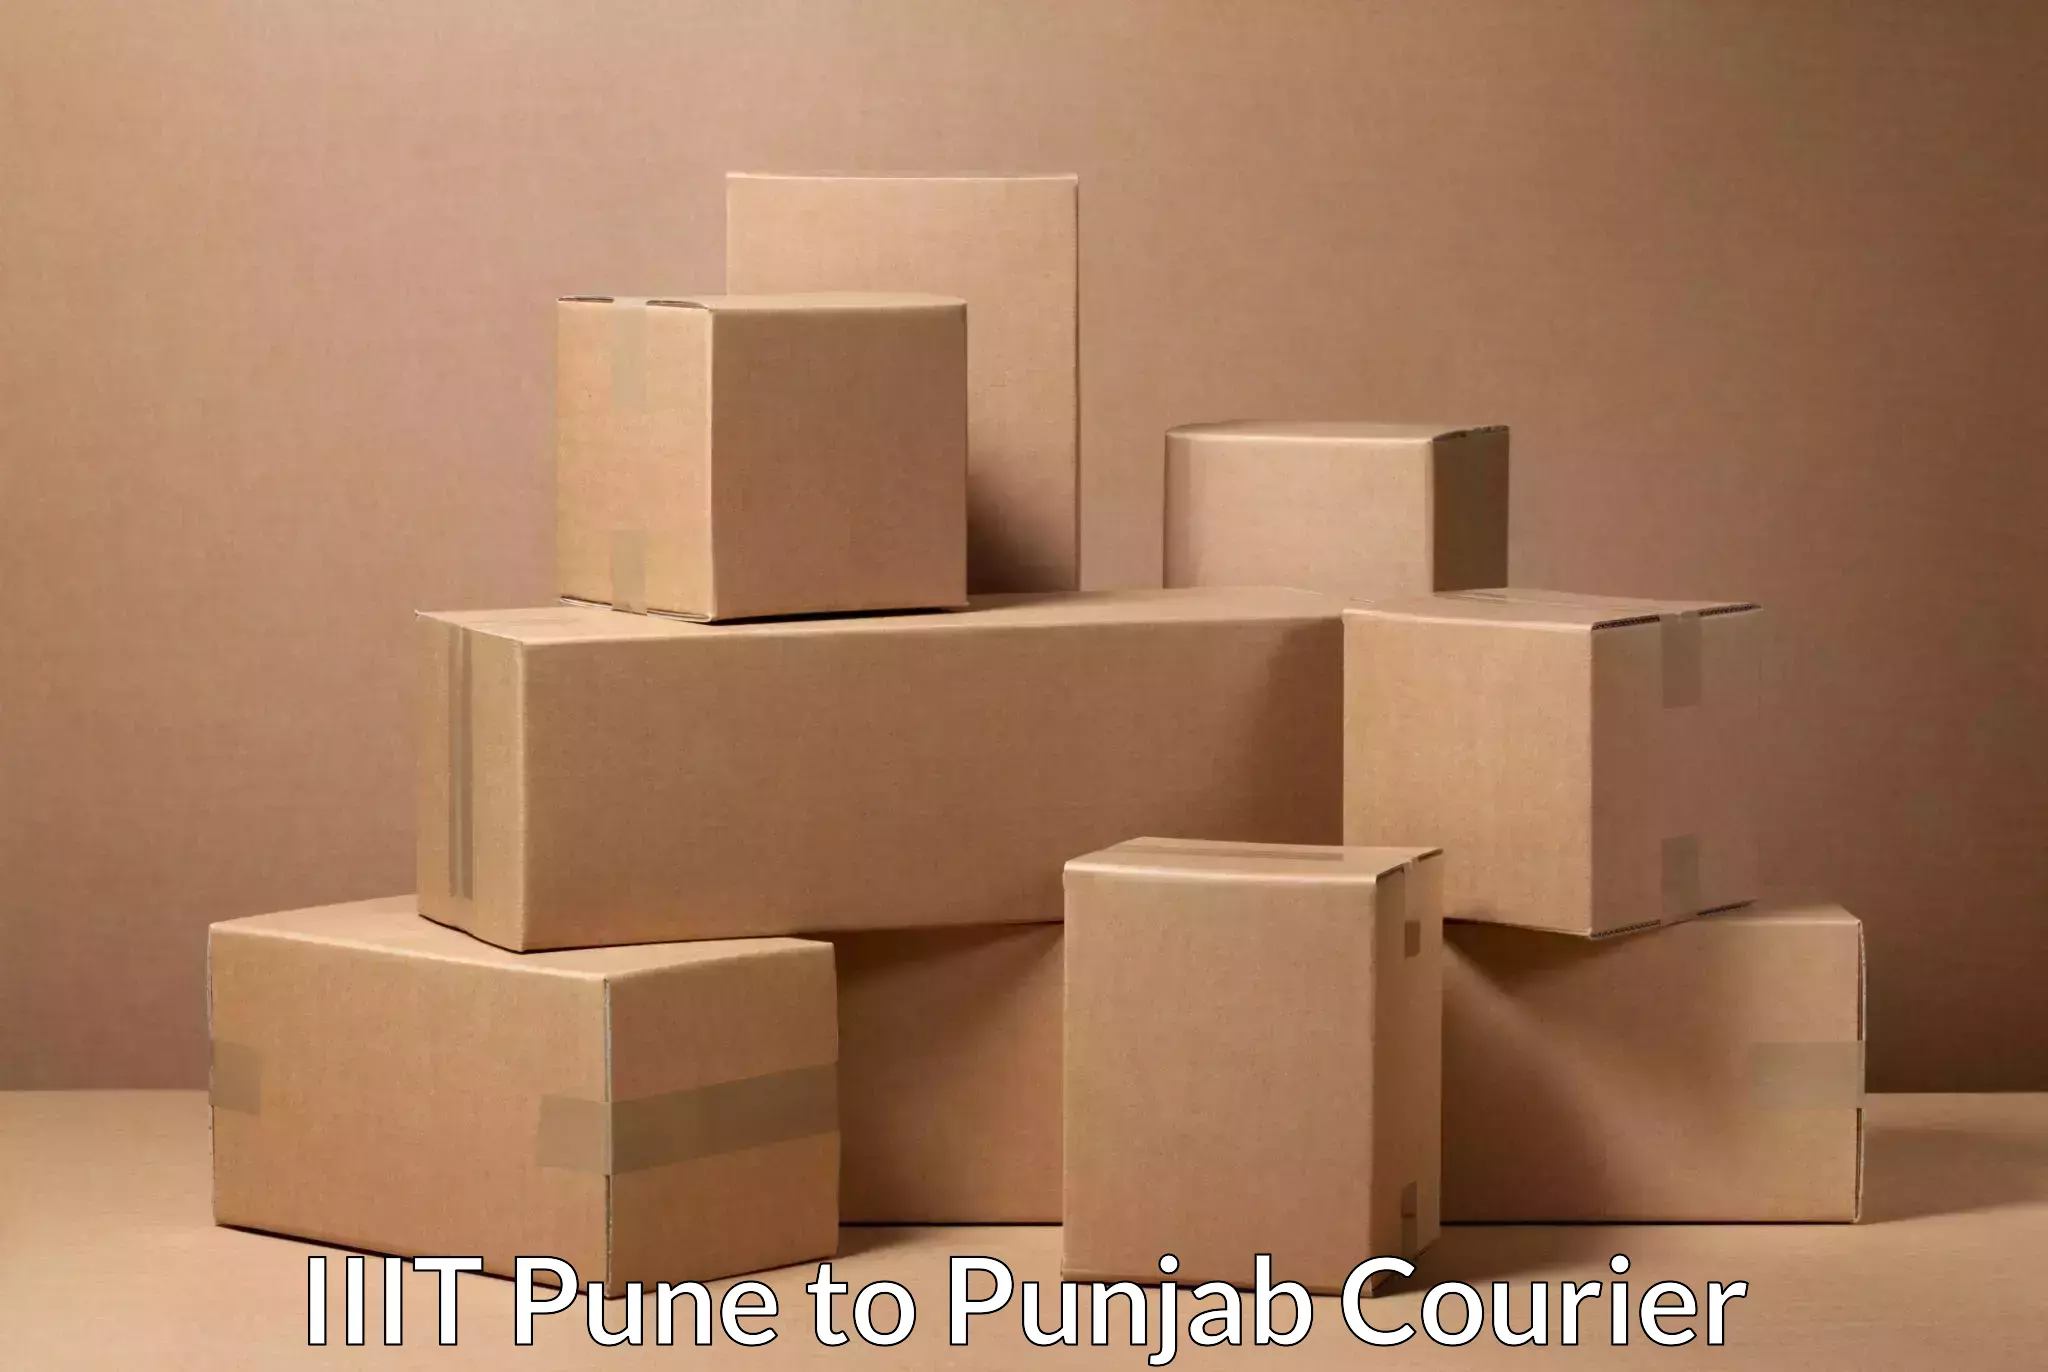 Tailored delivery services in IIIT Pune to Punjab